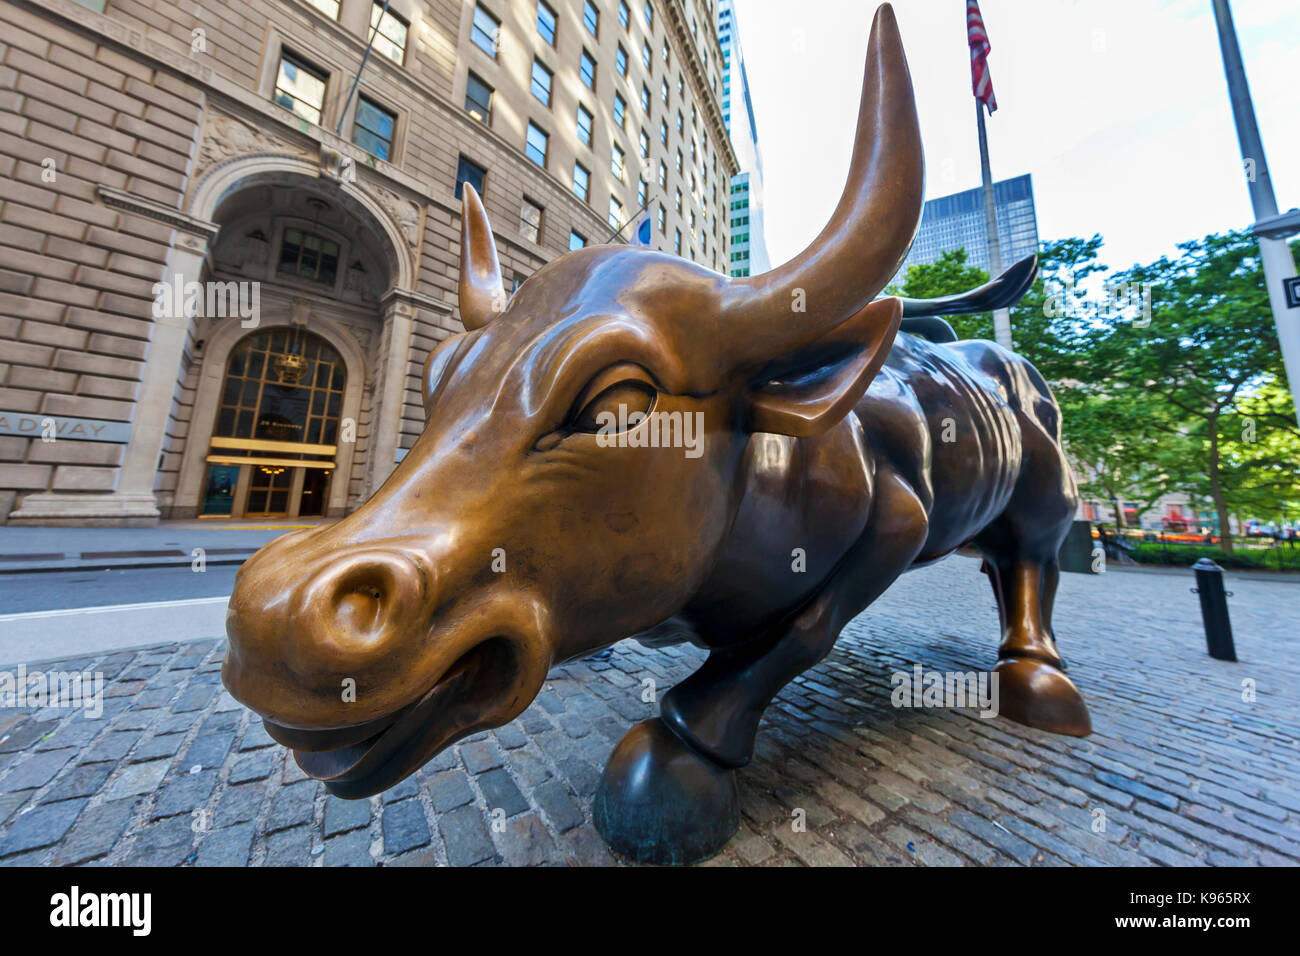 The Charging Bull Statue on display in the Financial District, near the New York Stock Exchange in Manhattan, New York City. Stock Photo